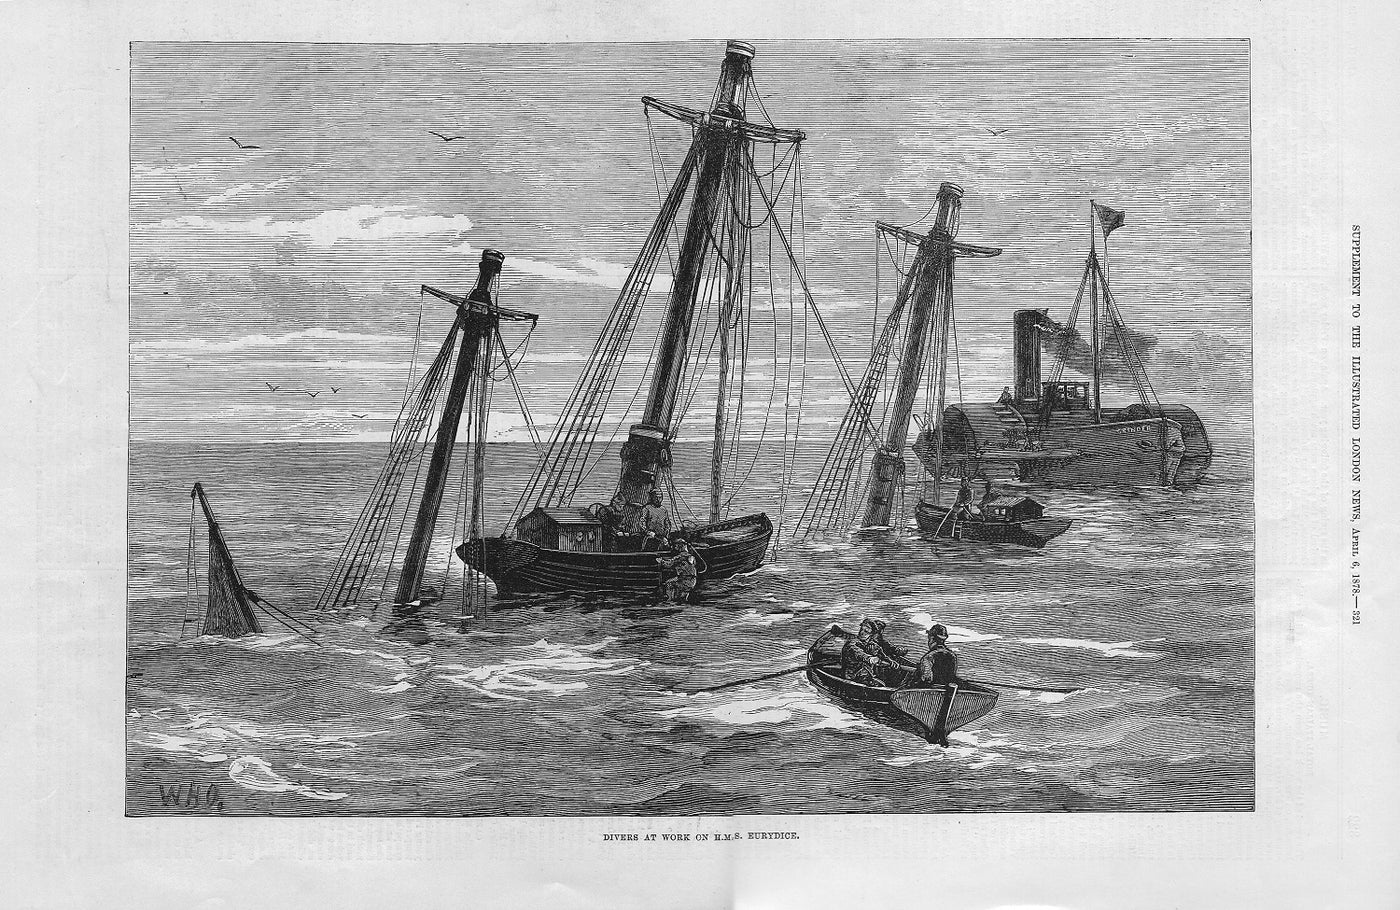 H.M.S. Eurydice salvaged off the Isle of Wight antique print 1878